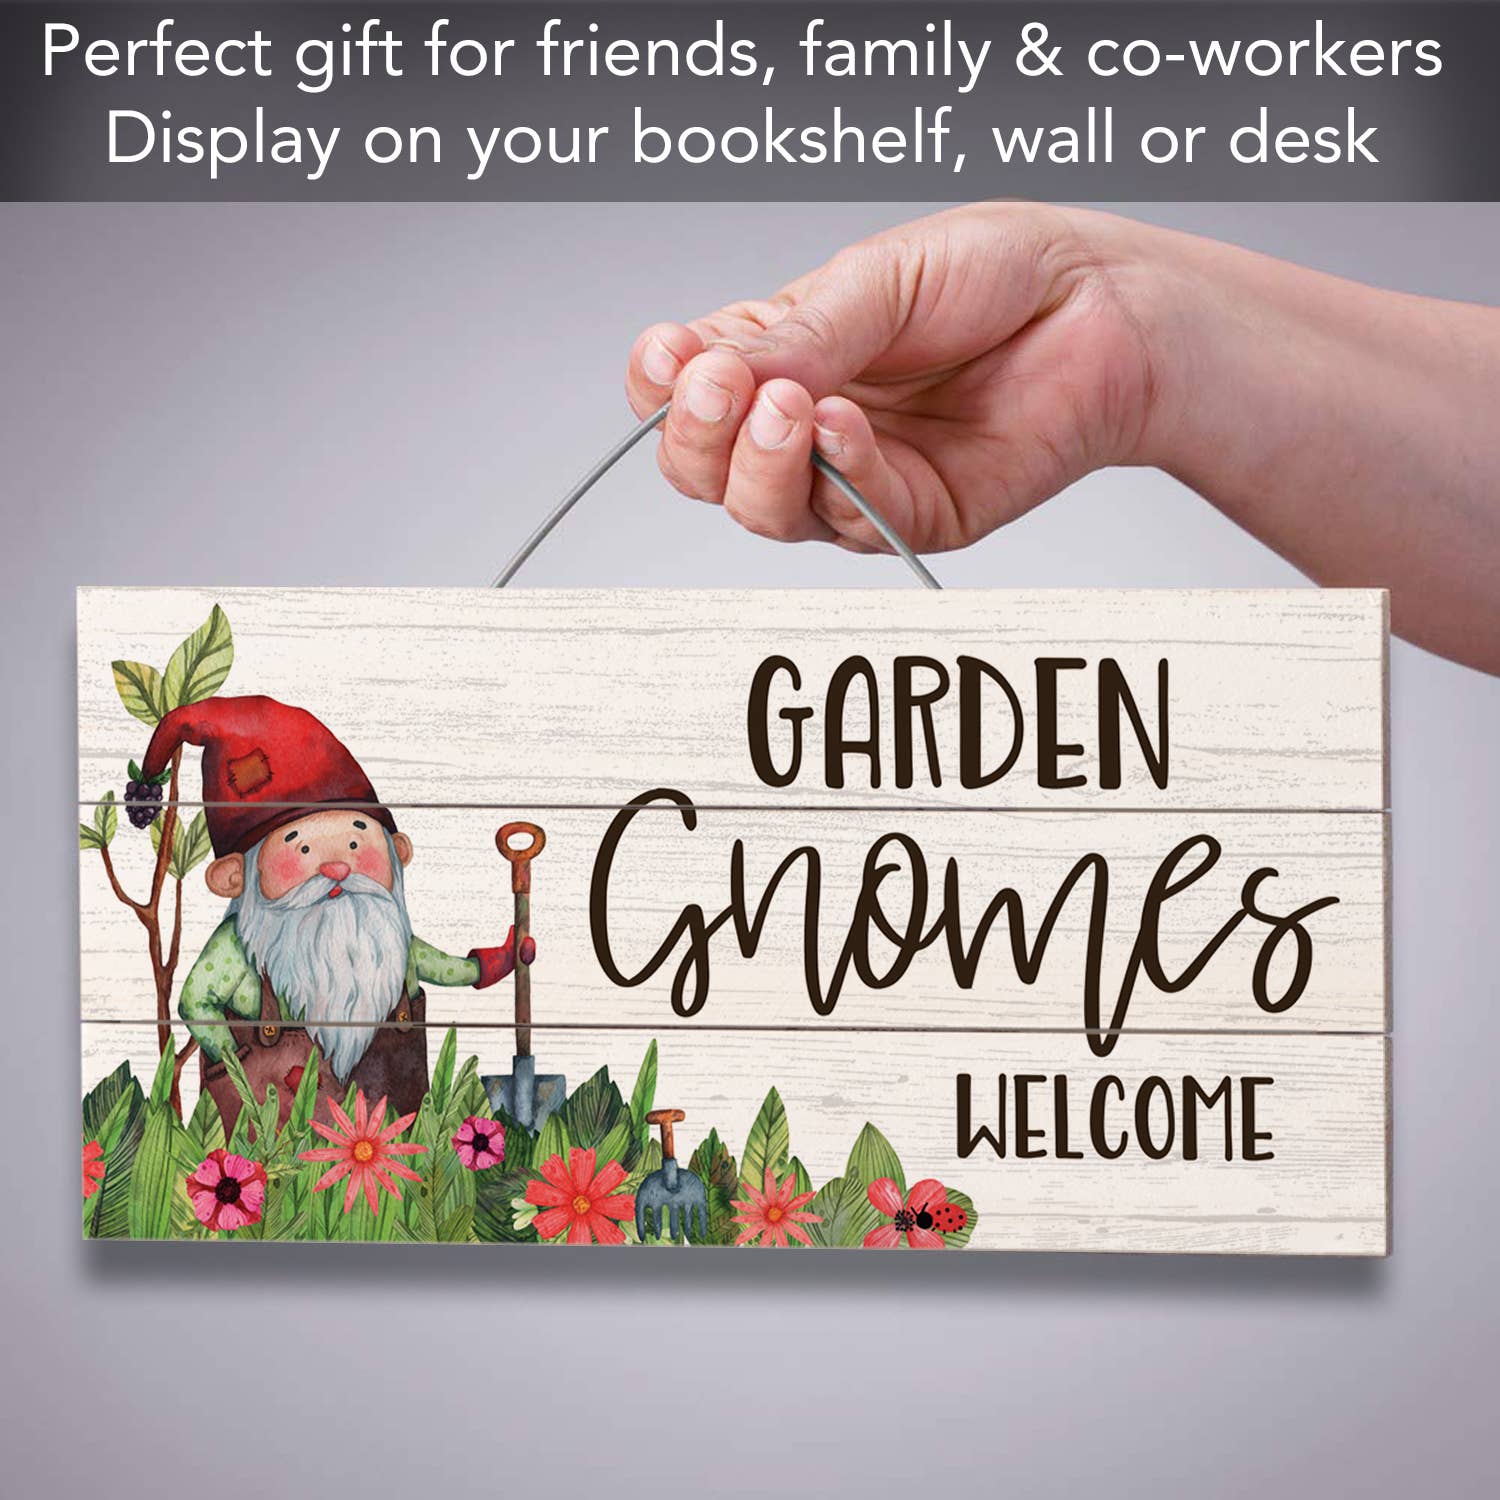 Sign: Garden Gnomes Decorative Slatted Pallet Wood Sign 12" by 6"